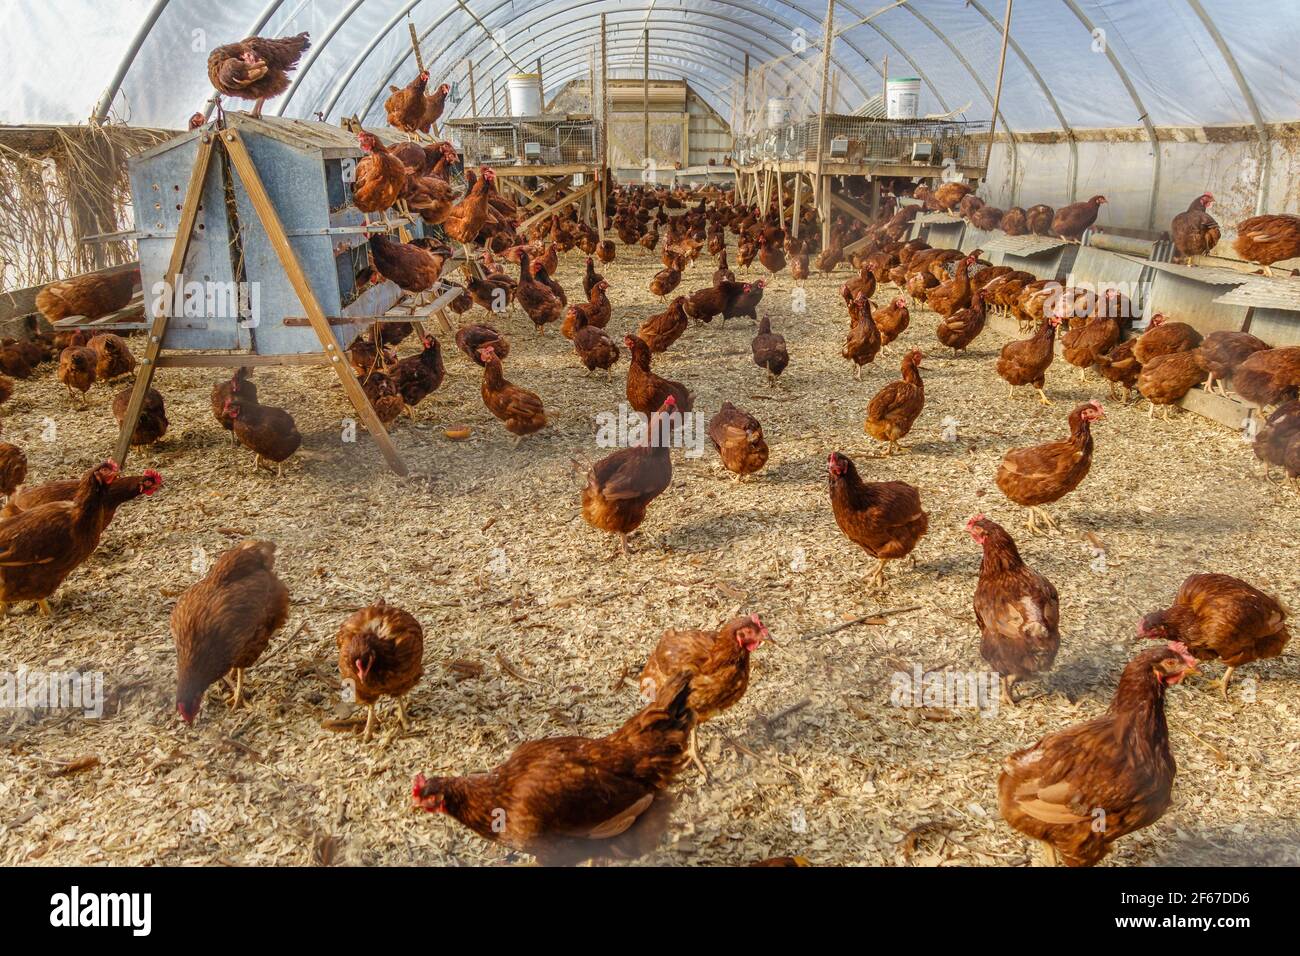 Red free-range chickens in large chicken coop facility on organic farm. Stock Photo